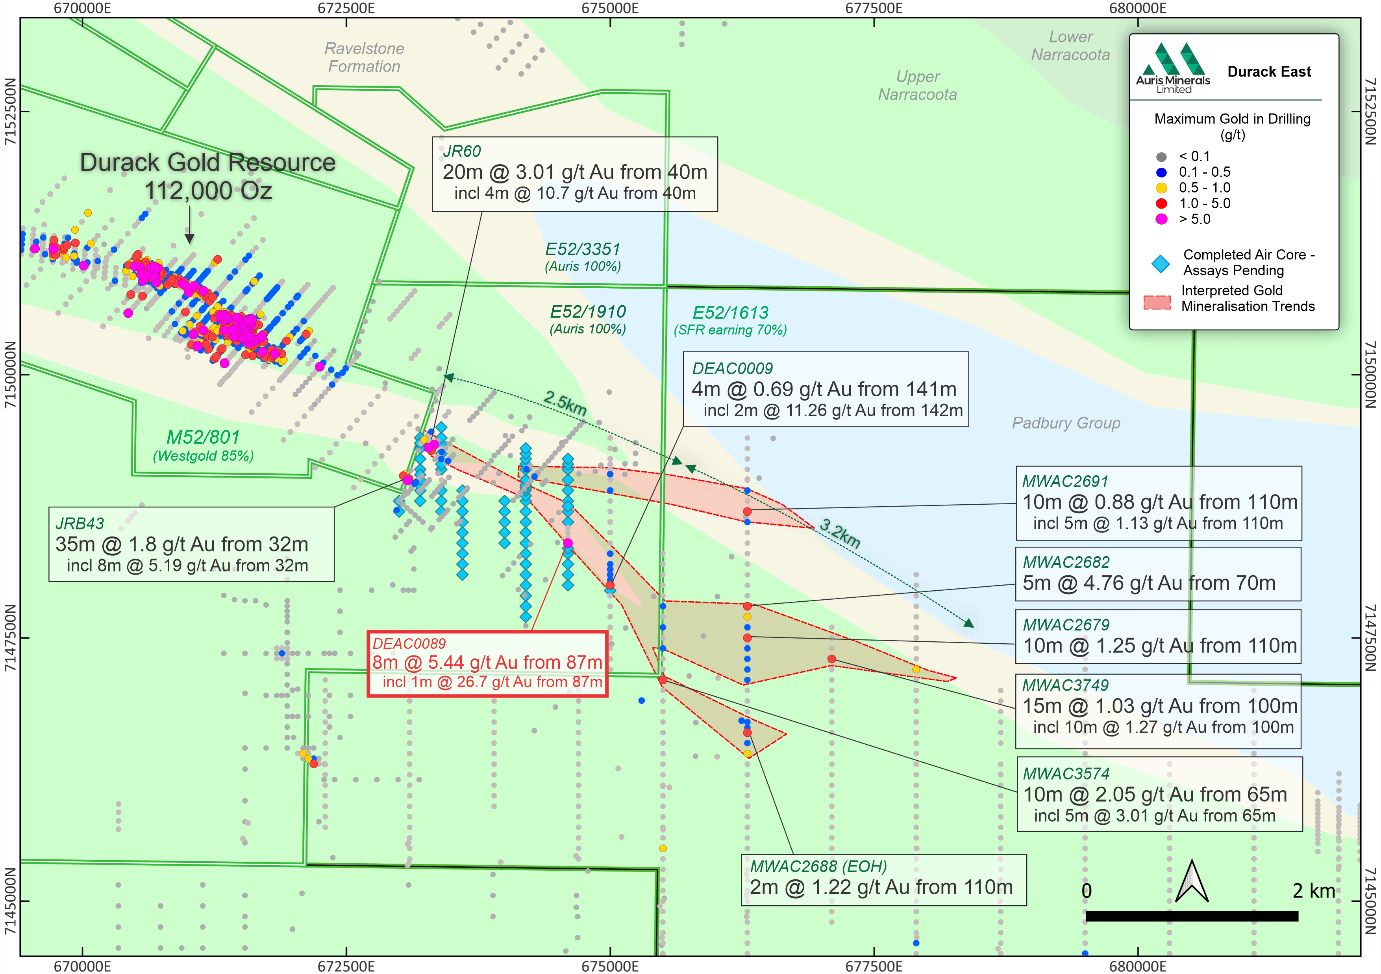 Durack East Prospect/Morck Well – Drilling and Geology Summary